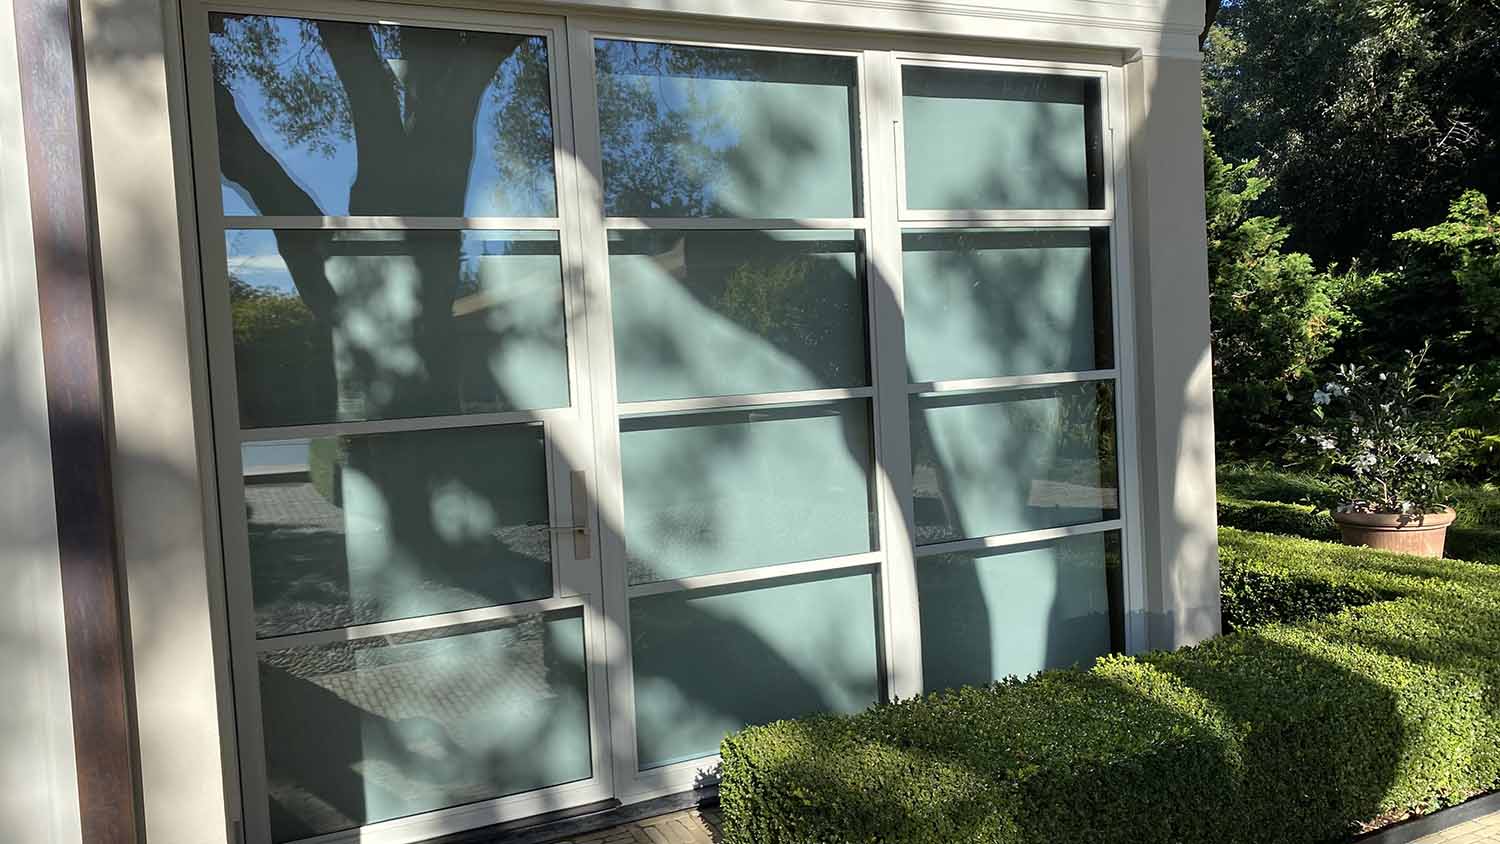 3M Prestige Exterior Window Film for Atherton, CA homes, installed by ClimatePro.